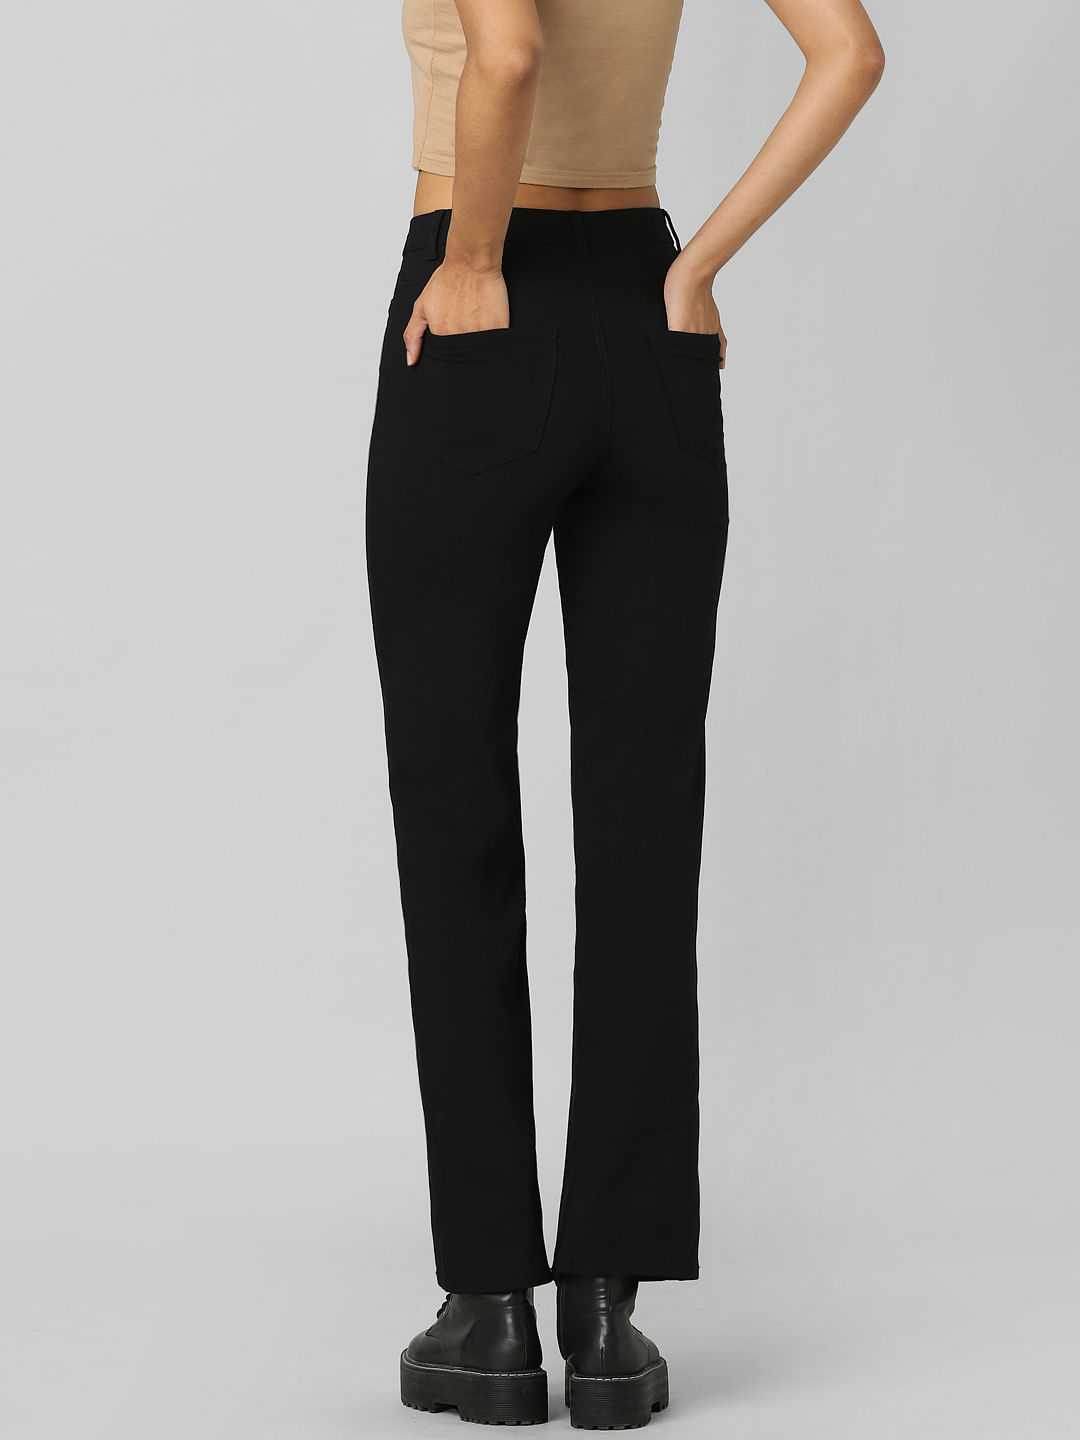 Buy Womens Black Straight Fit Trousers for Women Online at Bewakoof